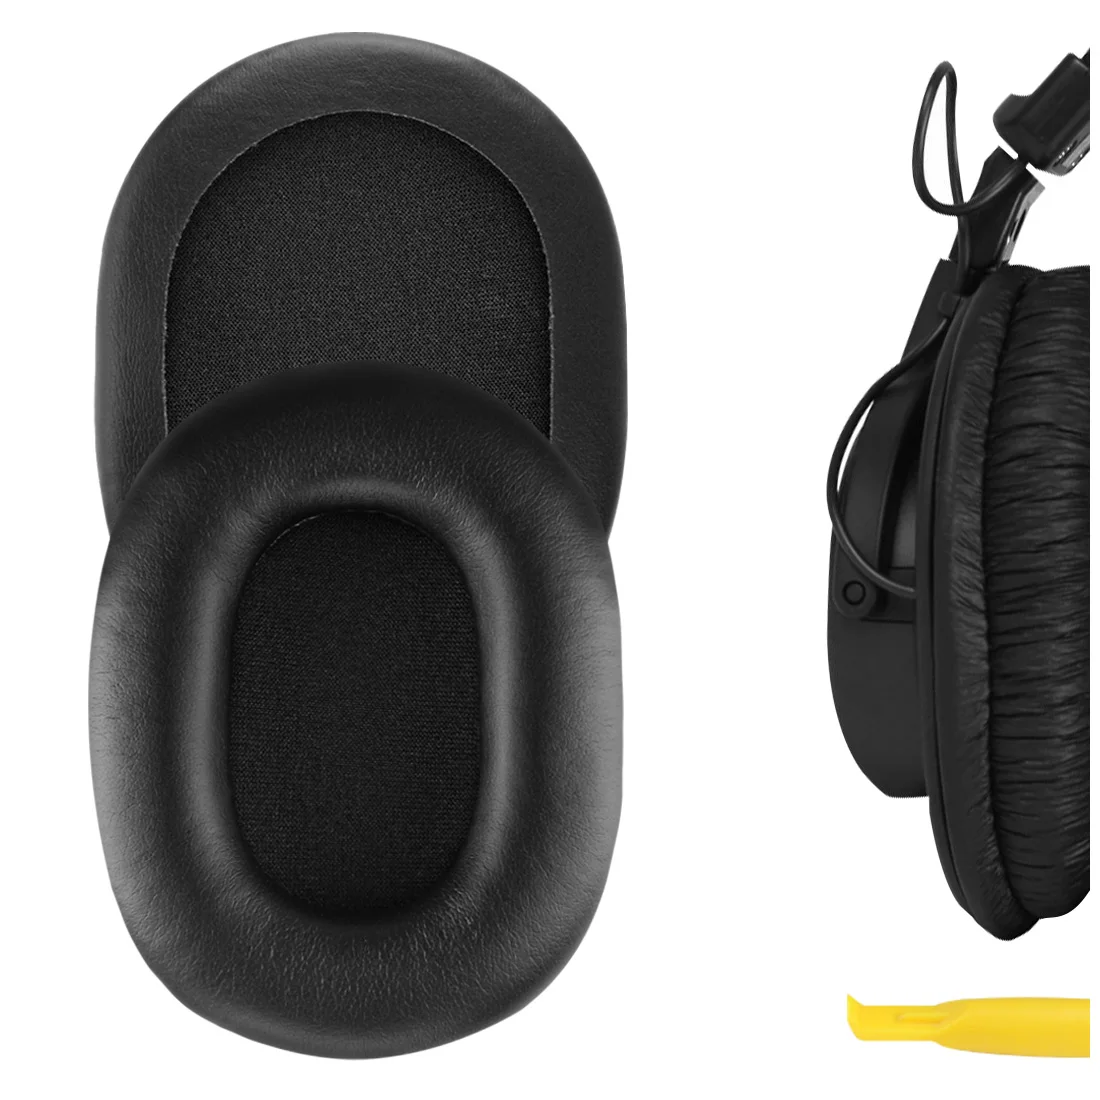 

Geekria Earpads for Sony MDR-7506 MDR-V6 MDR-CD900ST Replacement Headphones Protein Leather Ear Pads Cover Cushions Foam Earmuff